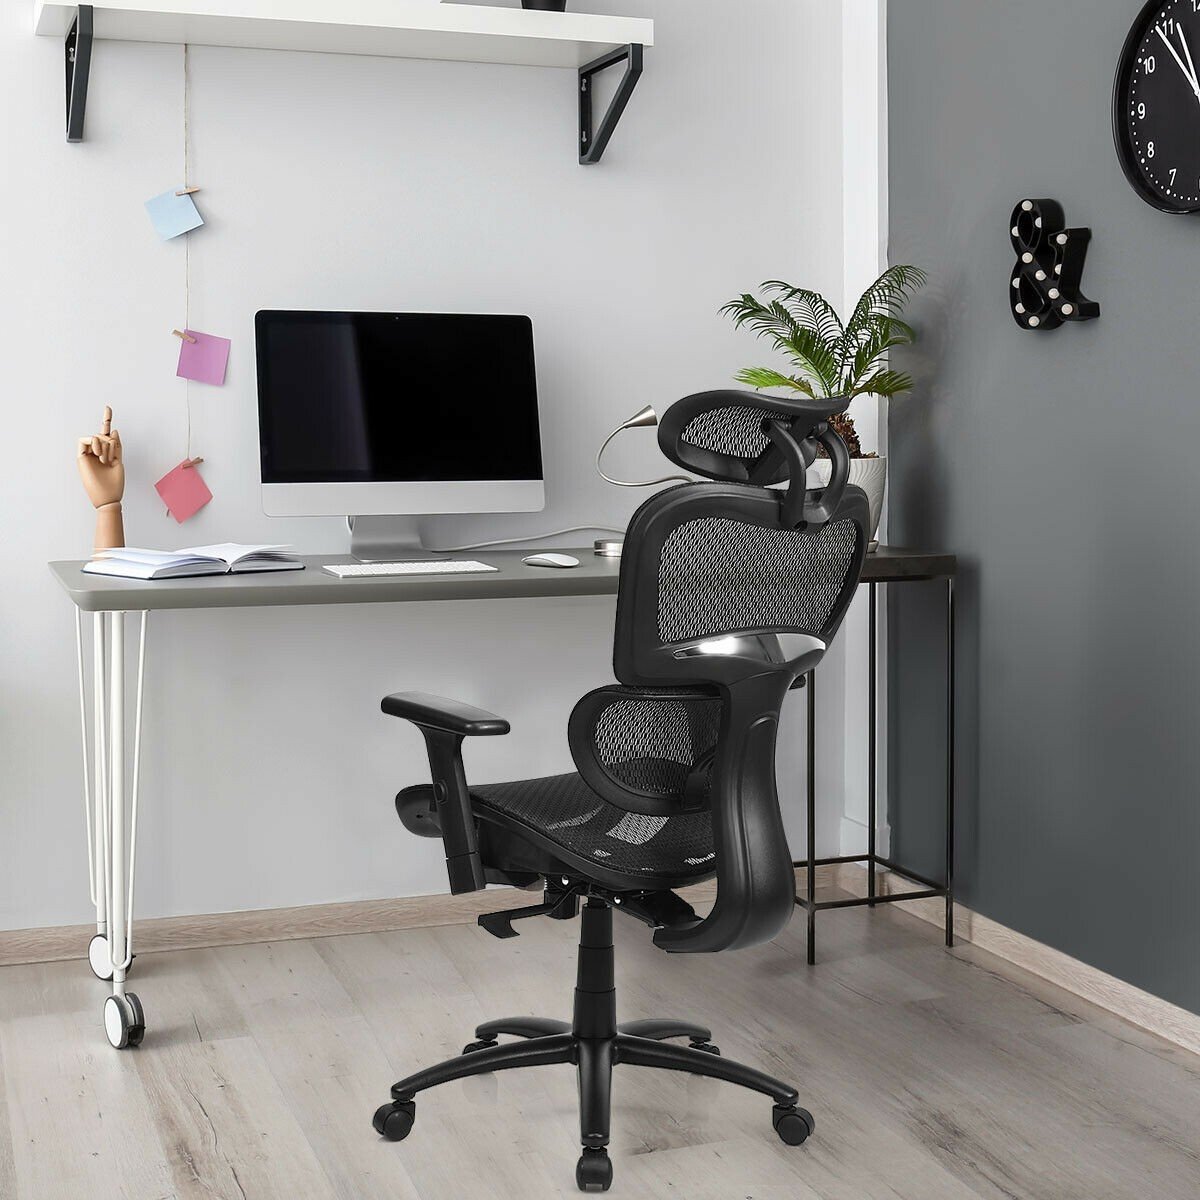 Gaming Chair - Mesh Office Chair Recliner Adjustable Headrest